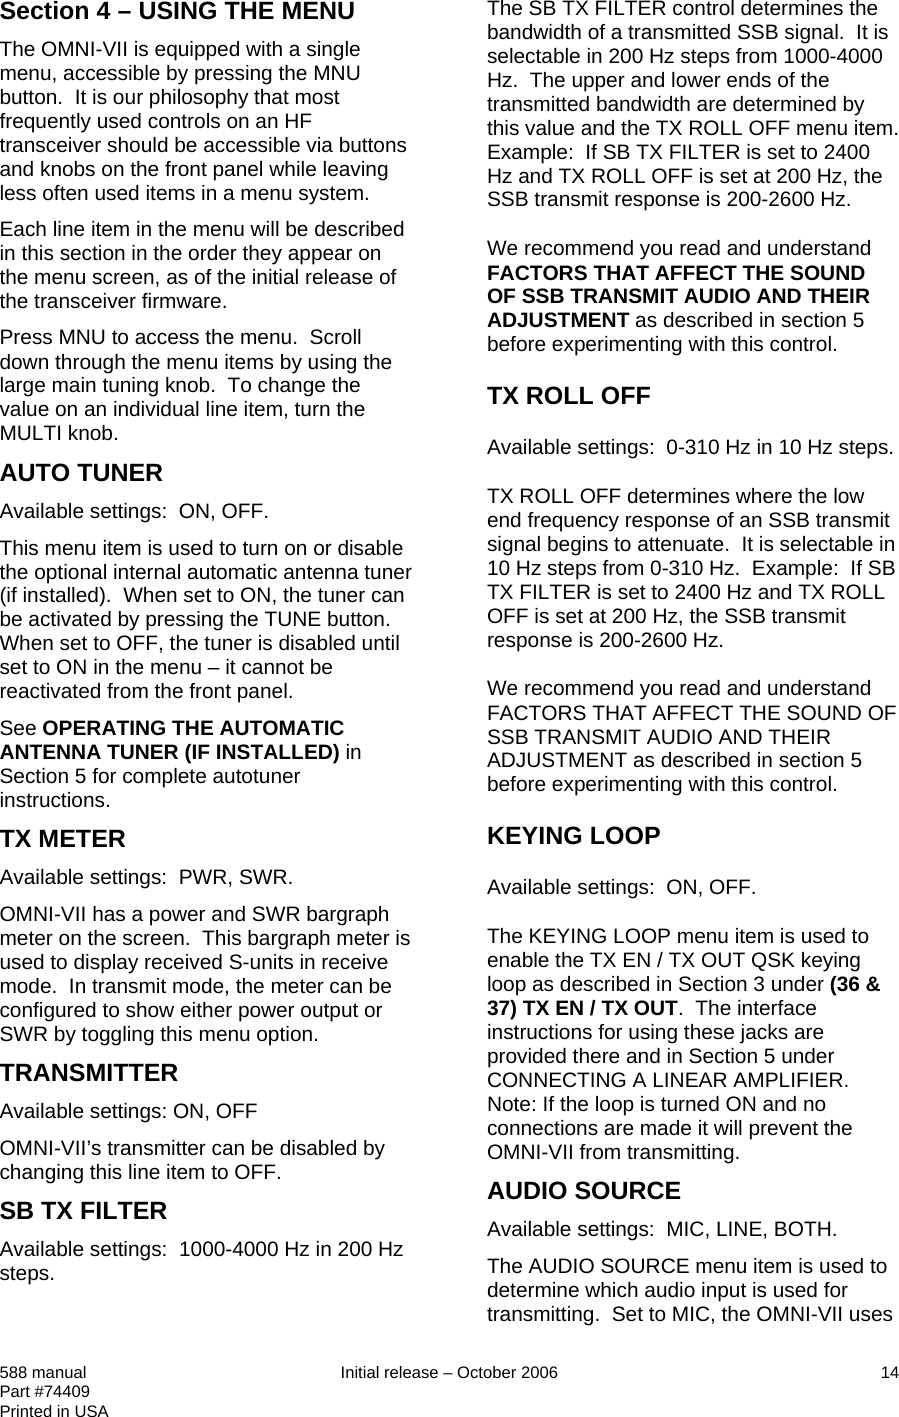 Section 4 – USING THE MENU The OMNI-VII is equipped with a single menu, accessible by pressing the MNU button.  It is our philosophy that most frequently used controls on an HF transceiver should be accessible via buttons and knobs on the front panel while leaving less often used items in a menu system.  Each line item in the menu will be described in this section in the order they appear on the menu screen, as of the initial release of the transceiver firmware. Press MNU to access the menu.  Scroll down through the menu items by using the large main tuning knob.  To change the value on an individual line item, turn the MULTI knob. AUTO TUNER Available settings:  ON, OFF. This menu item is used to turn on or disable the optional internal automatic antenna tuner (if installed).  When set to ON, the tuner can be activated by pressing the TUNE button.  When set to OFF, the tuner is disabled until set to ON in the menu – it cannot be reactivated from the front panel. See OPERATING THE AUTOMATIC ANTENNA TUNER (IF INSTALLED) in Section 5 for complete autotuner instructions. TX METER Available settings:  PWR, SWR. OMNI-VII has a power and SWR bargraph meter on the screen.  This bargraph meter is used to display received S-units in receive mode.  In transmit mode, the meter can be configured to show either power output or SWR by toggling this menu option.  TRANSMITTER Available settings: ON, OFF OMNI-VII’s transmitter can be disabled by changing this line item to OFF.  SB TX FILTER Available settings:  1000-4000 Hz in 200 Hz steps. The SB TX FILTER control determines the bandwidth of a transmitted SSB signal.  It is selectable in 200 Hz steps from 1000-4000 Hz.  The upper and lower ends of the transmitted bandwidth are determined by this value and the TX ROLL OFF menu item.  Example:  If SB TX FILTER is set to 2400 Hz and TX ROLL OFF is set at 200 Hz, the SSB transmit response is 200-2600 Hz. We recommend you read and understand FACTORS THAT AFFECT THE SOUND OF SSB TRANSMIT AUDIO AND THEIR ADJUSTMENT as described in section 5 before experimenting with this control.  TX ROLL OFF Available settings:  0-310 Hz in 10 Hz steps. TX ROLL OFF determines where the low end frequency response of an SSB transmit signal begins to attenuate.  It is selectable in 10 Hz steps from 0-310 Hz.  Example:  If SB TX FILTER is set to 2400 Hz and TX ROLL OFF is set at 200 Hz, the SSB transmit response is 200-2600 Hz. We recommend you read and understand FACTORS THAT AFFECT THE SOUND OF SSB TRANSMIT AUDIO AND THEIR ADJUSTMENT as described in section 5 before experimenting with this control. KEYING LOOP Available settings:  ON, OFF. The KEYING LOOP menu item is used to enable the TX EN / TX OUT QSK keying loop as described in Section 3 under (36 &amp; 37) TX EN / TX OUT.  The interface instructions for using these jacks are provided there and in Section 5 under CONNECTING A LINEAR AMPLIFIER. Note: If the loop is turned ON and no connections are made it will prevent the OMNI-VII from transmitting. AUDIO SOURCE Available settings:  MIC, LINE, BOTH. The AUDIO SOURCE menu item is used to determine which audio input is used for transmitting.  Set to MIC, the OMNI-VII uses 588 manual  Initial release – October 2006  14 Part #74409 Printed in USA 